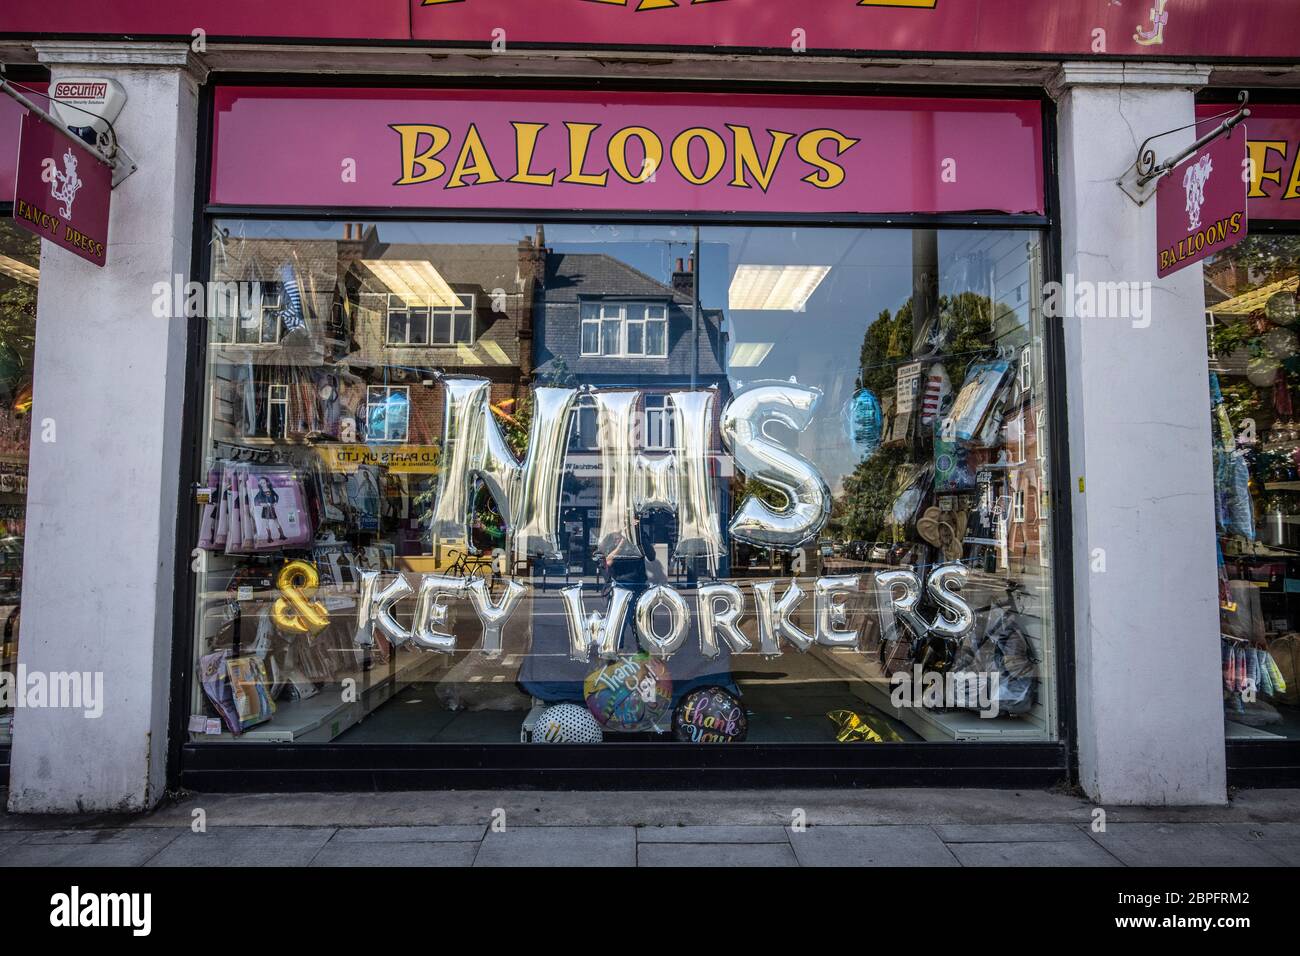 Party shop in East Sheen promoting NHS Key Workers during coronavirus lockdown with balloons in shop window, Southwest London, England, UK Stock Photo